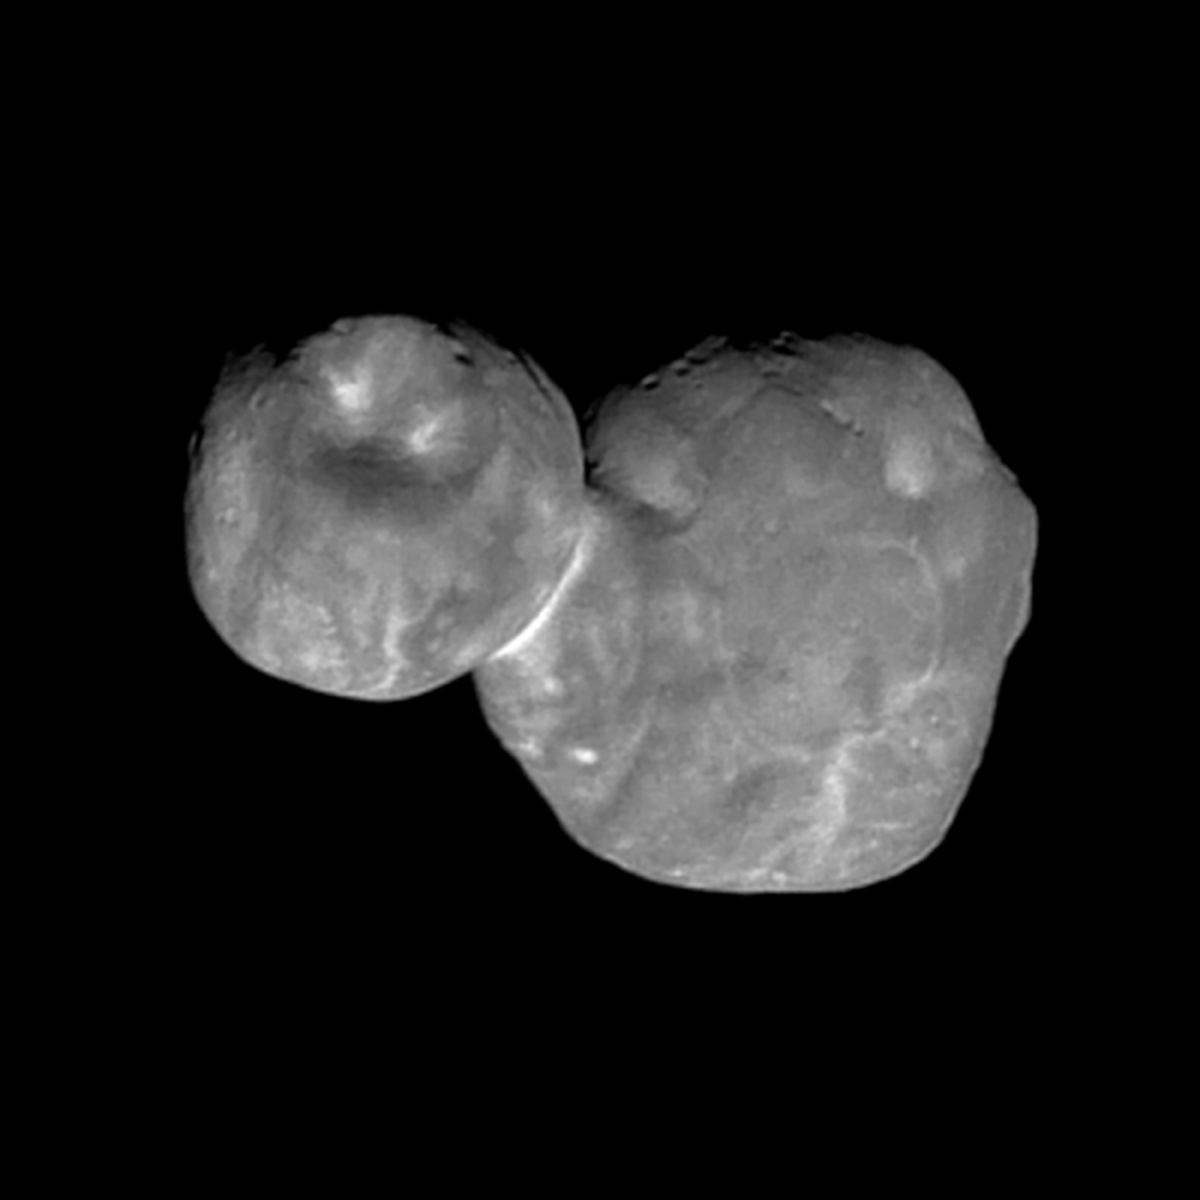 7 minutes before cloest aproach, taken at 6700 km mu69